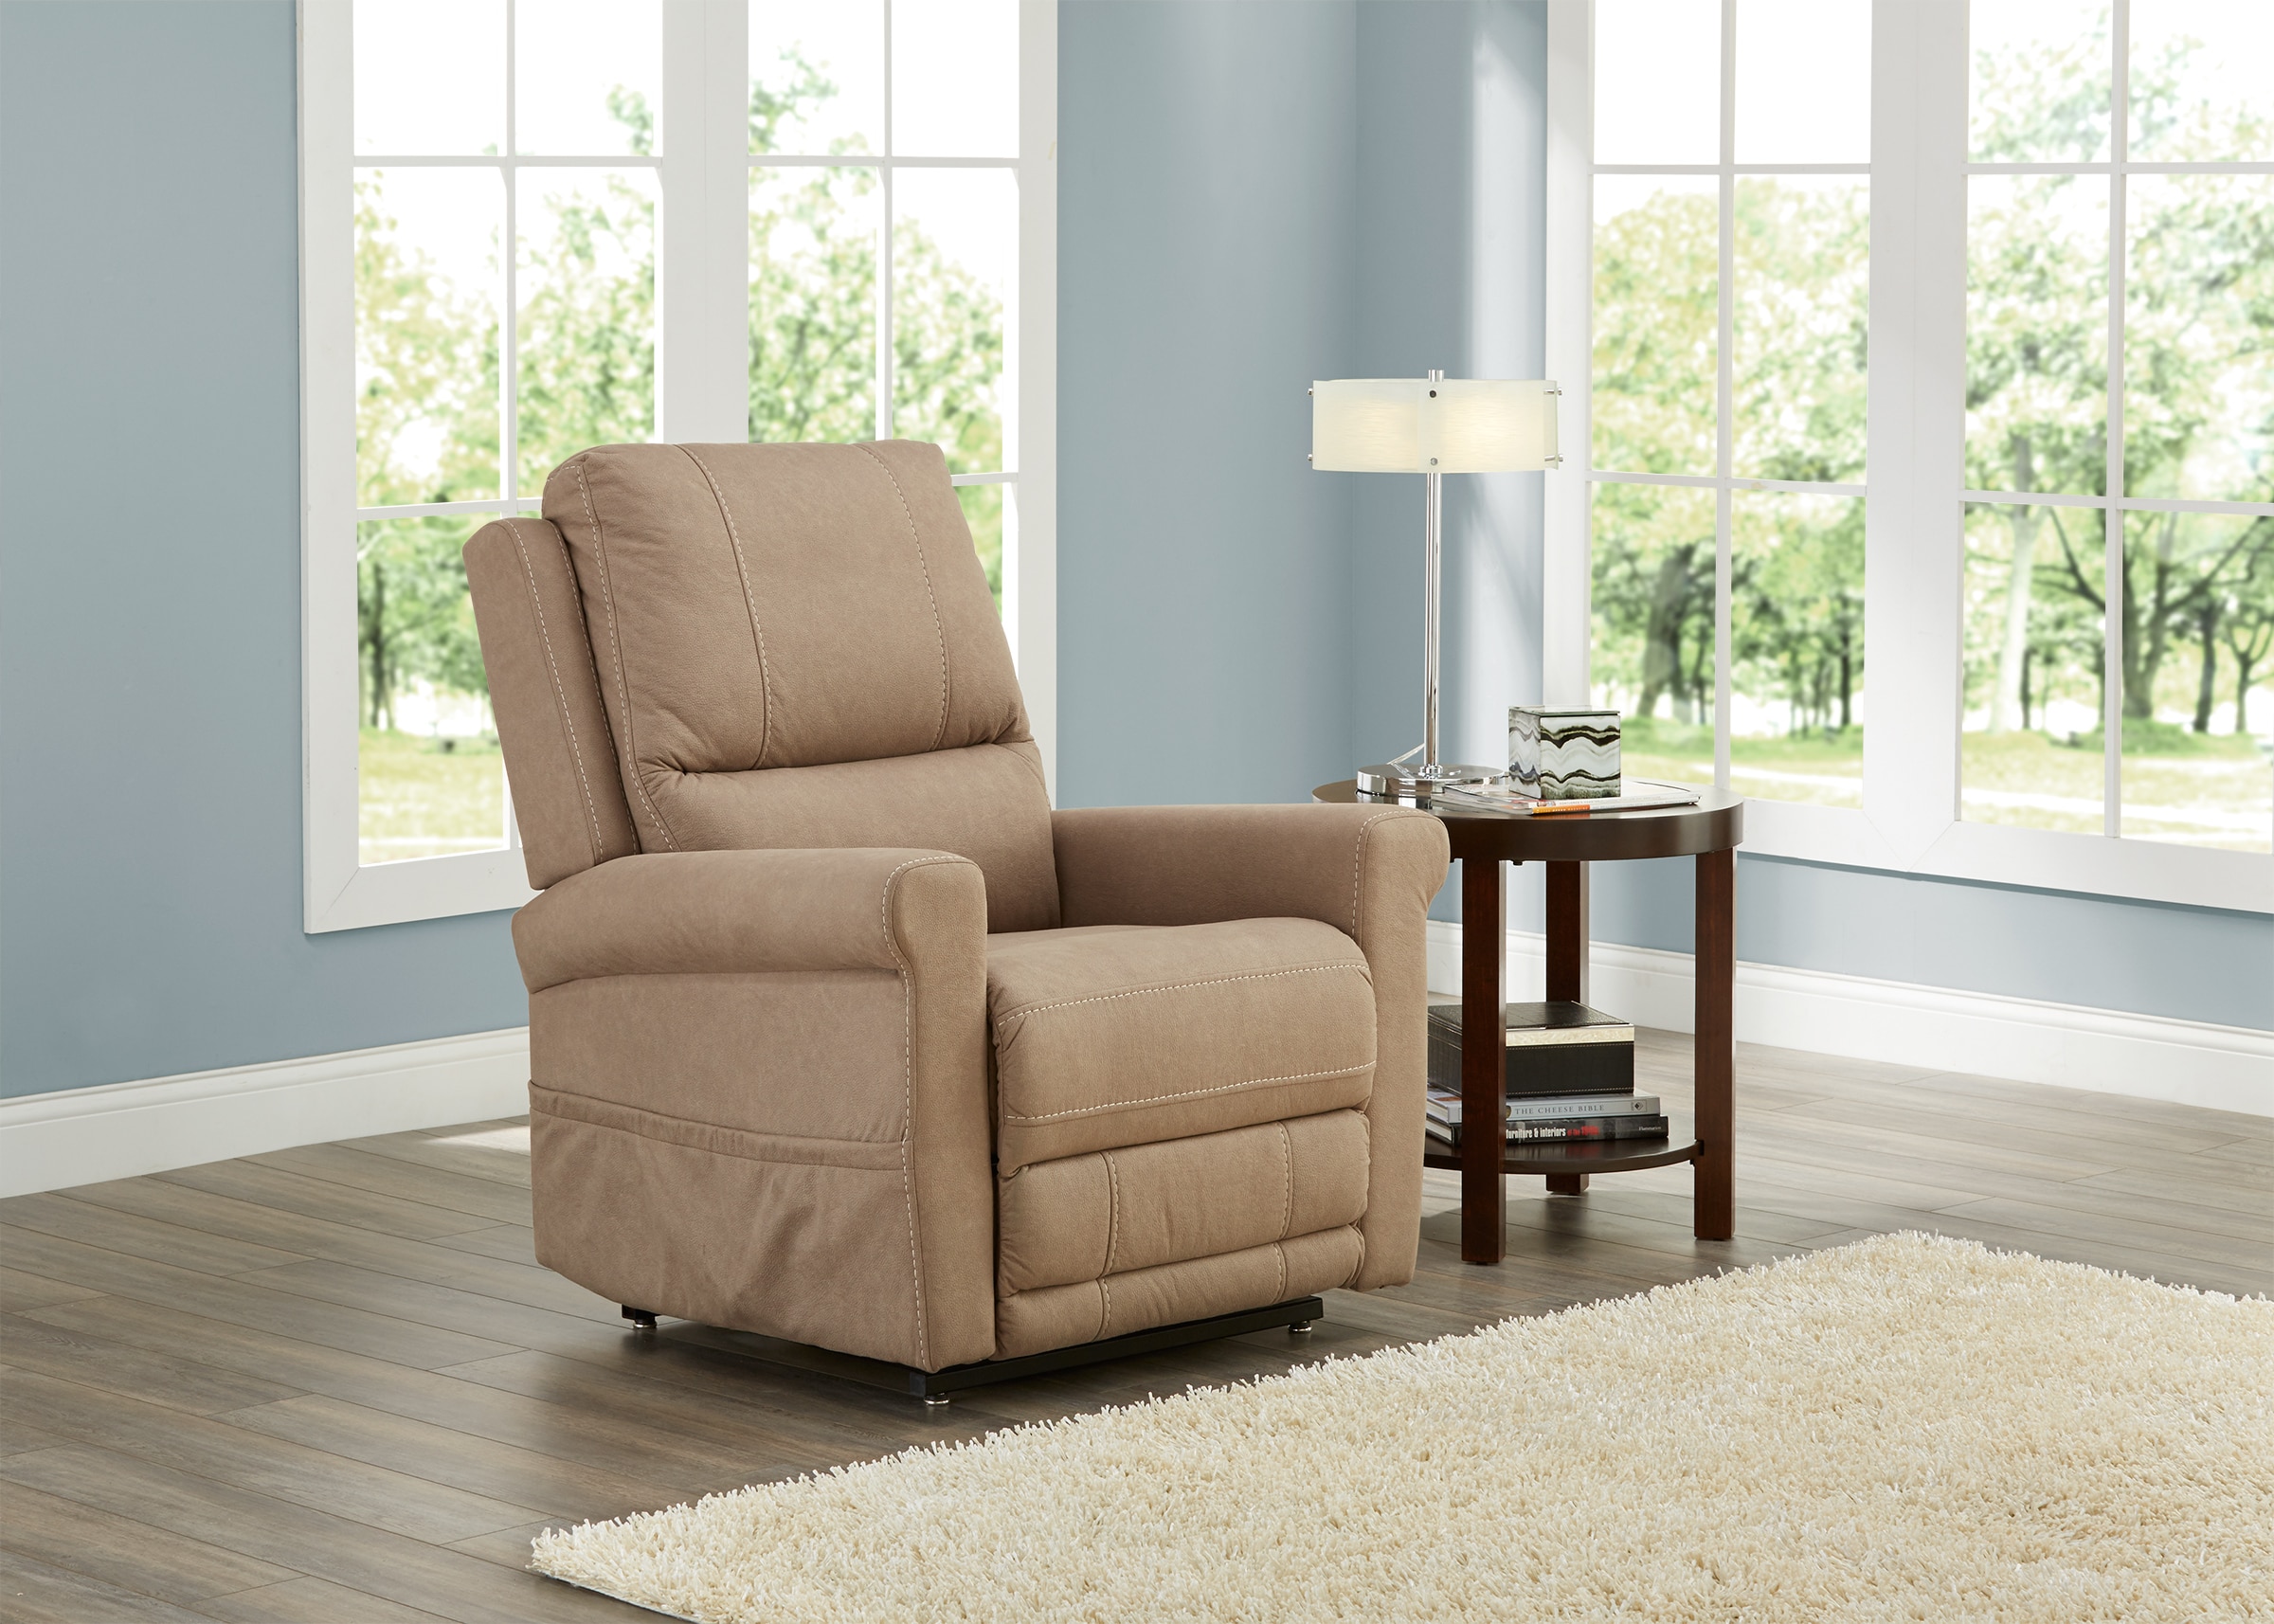 Power Lift Chairs Recliners The Roomplace